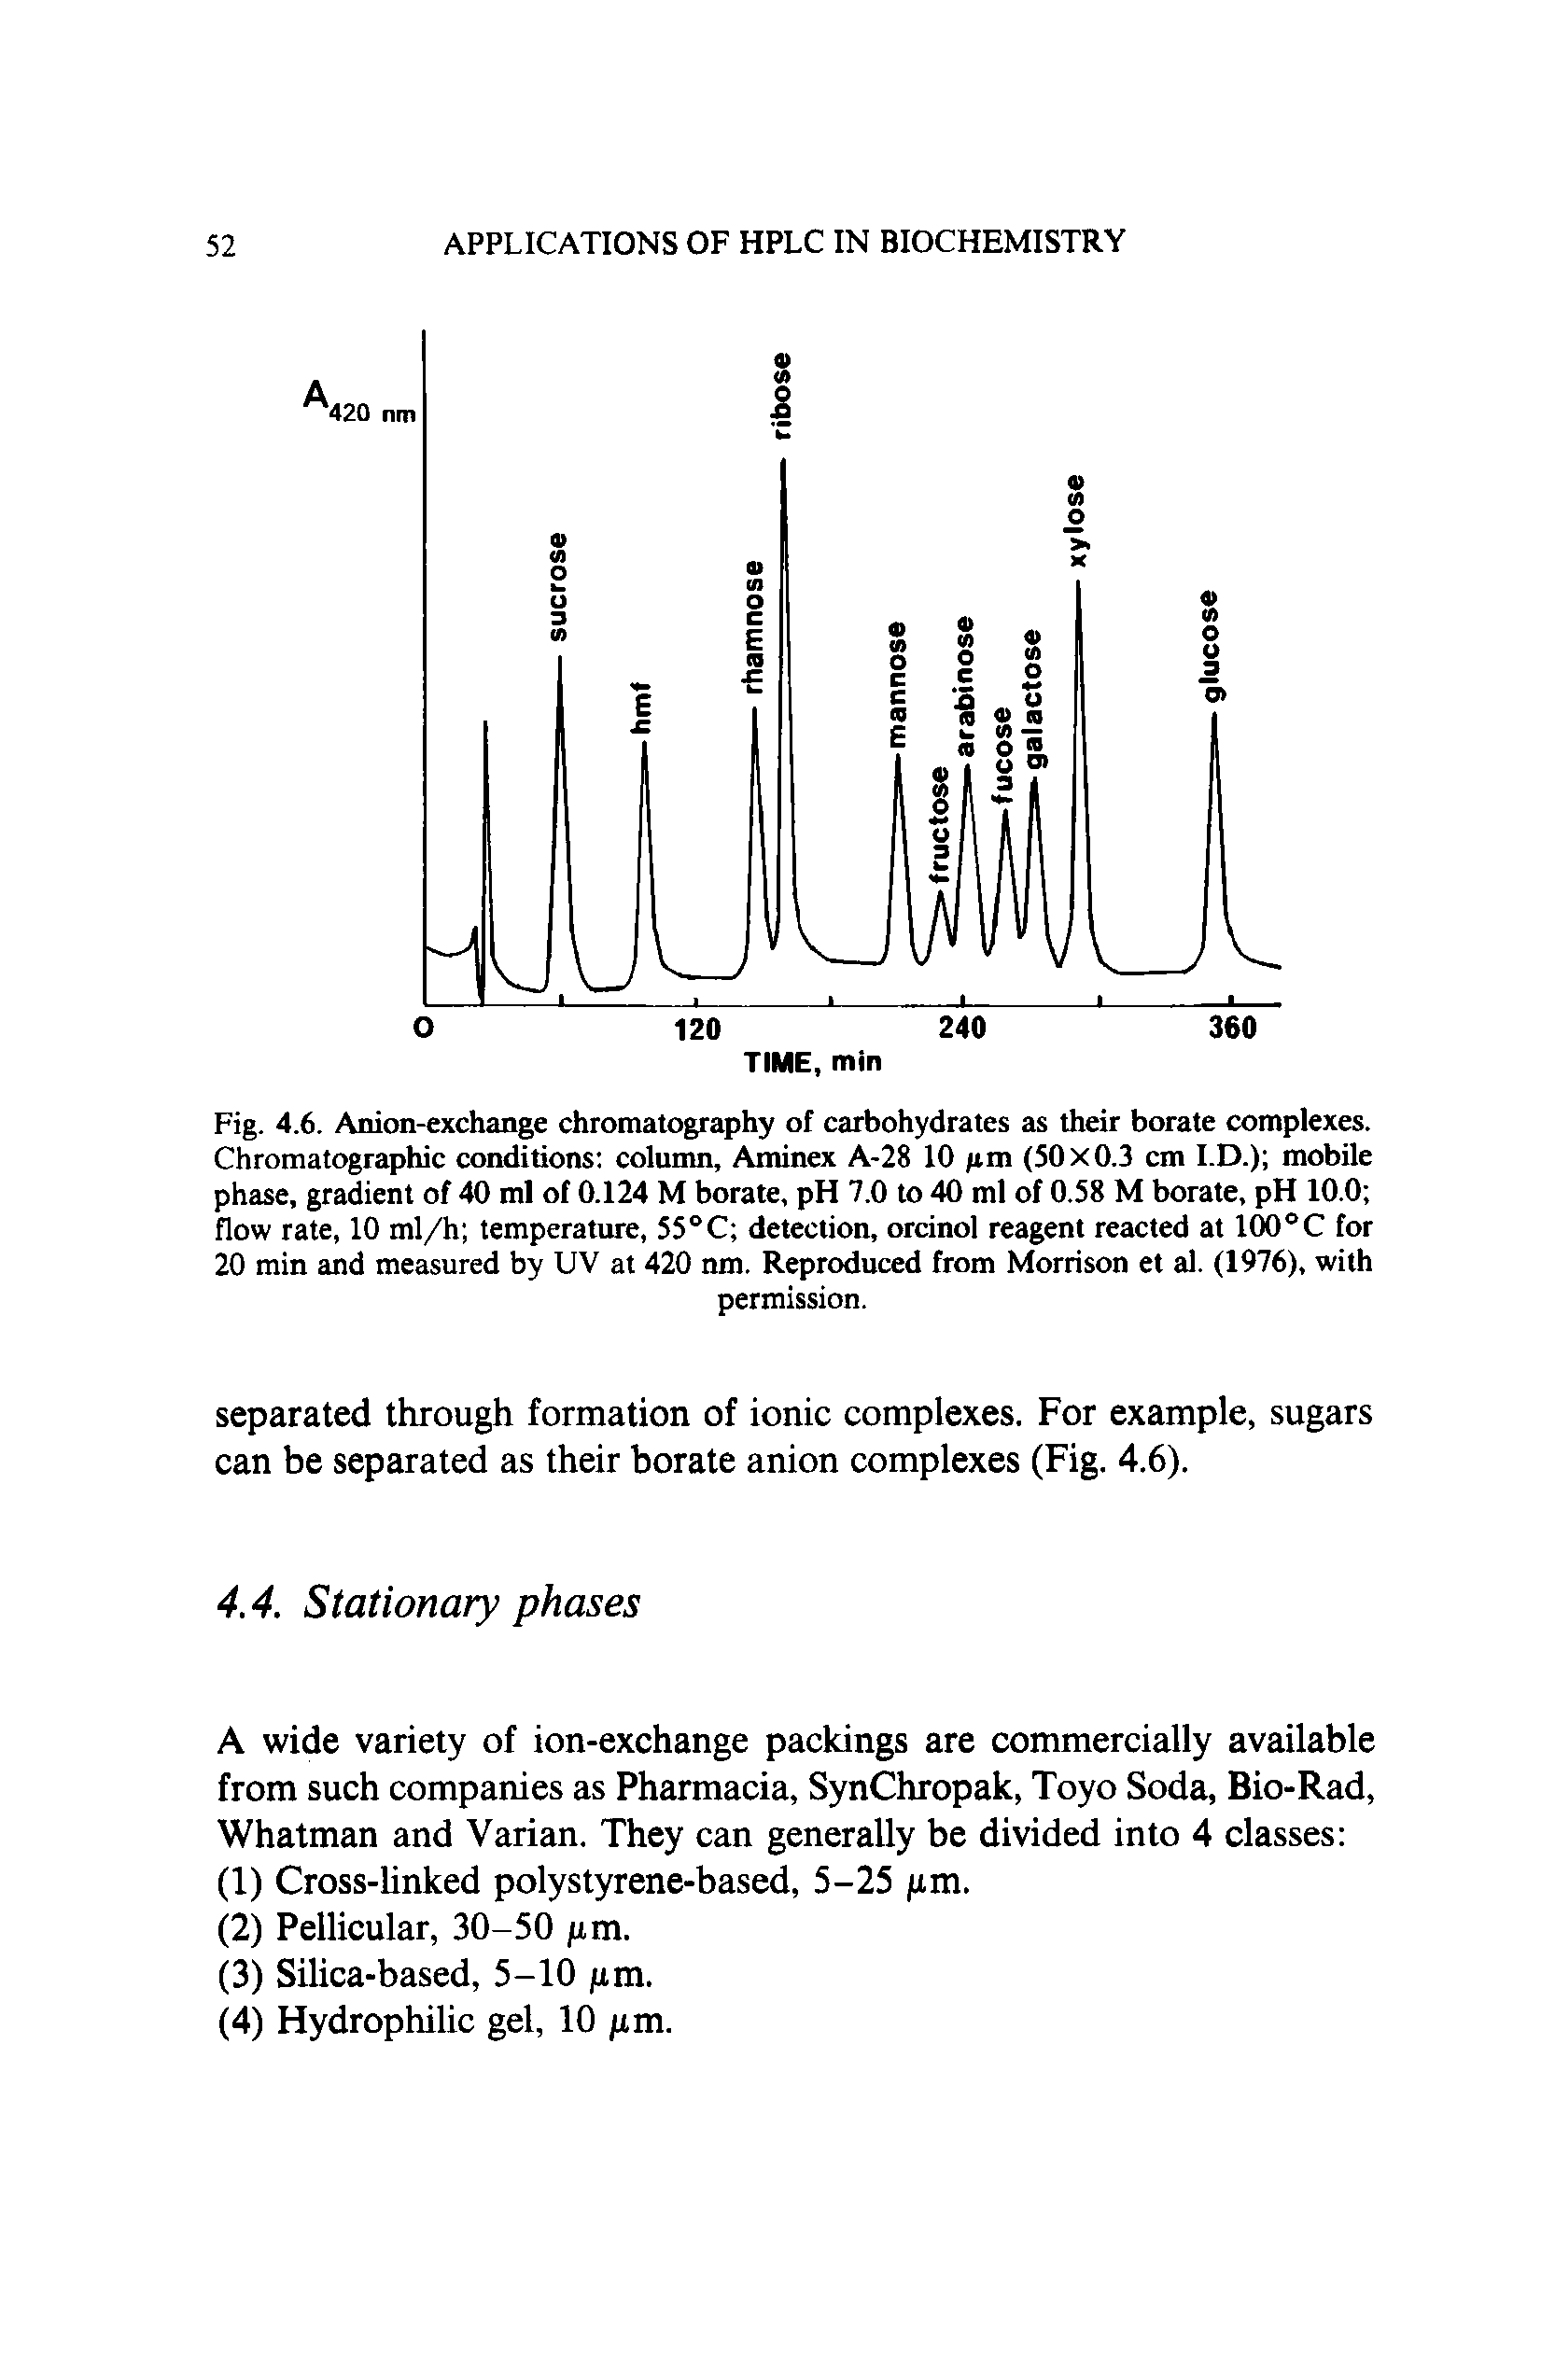 Fig. 4.6. Anion-exchange chromatography of carbohydrates as their borate complexes. Chromatographic conditions column, Aminex A-28 10 /im (50x0.3 cm I.D.) mobile phase, gradient of 40 ml of 0.124 M borate, pH 7.0 to 40 ml of 0.58 M borate, pH 10.0 flow rate, 10 ml/h temperature, 55°C detection, orcinol reagent reacted at 100°C for 20 min and measured by UV at 420 nm. Reproduced from Morrison et al. (1976), with...